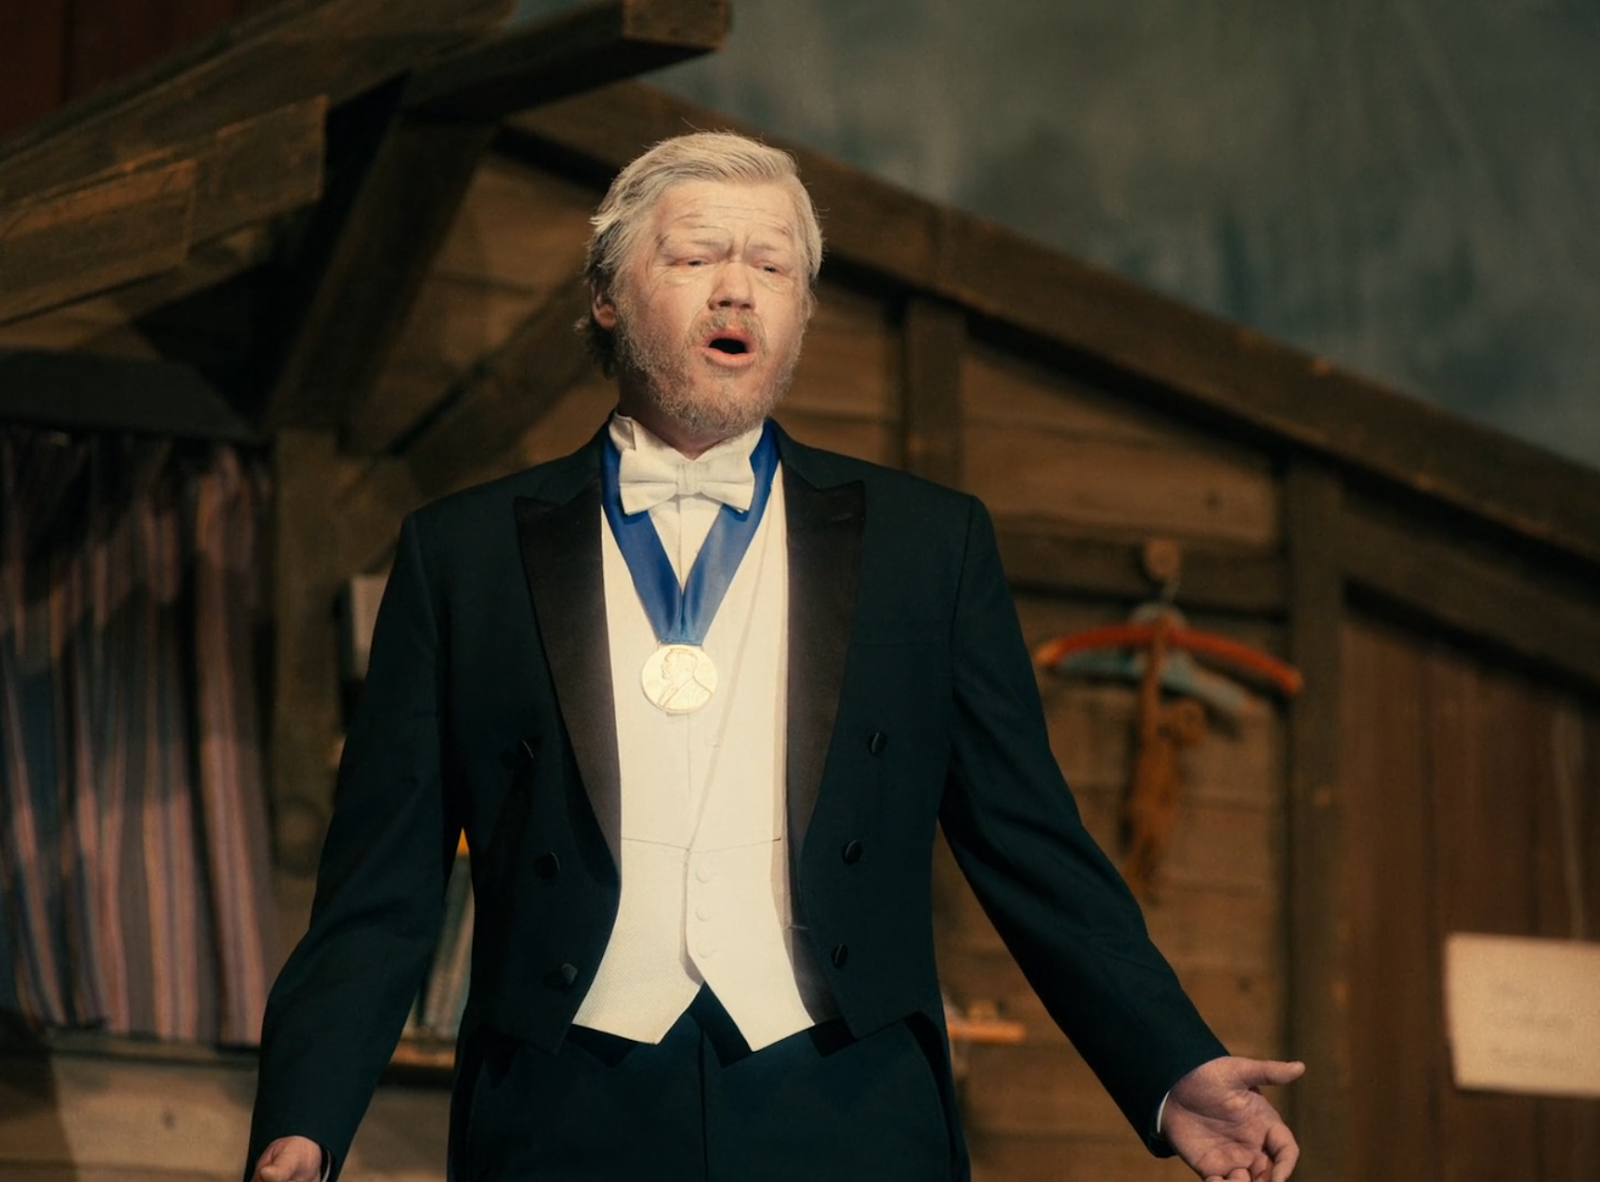 Jesse Plemons in I'm Thinking of Ending Things (2020). An elderly Jake in ageing makeup with grey hair, is wearing a tuxedo and a Nobel Prize medal, performing a song on stage, gazing out at the audience.